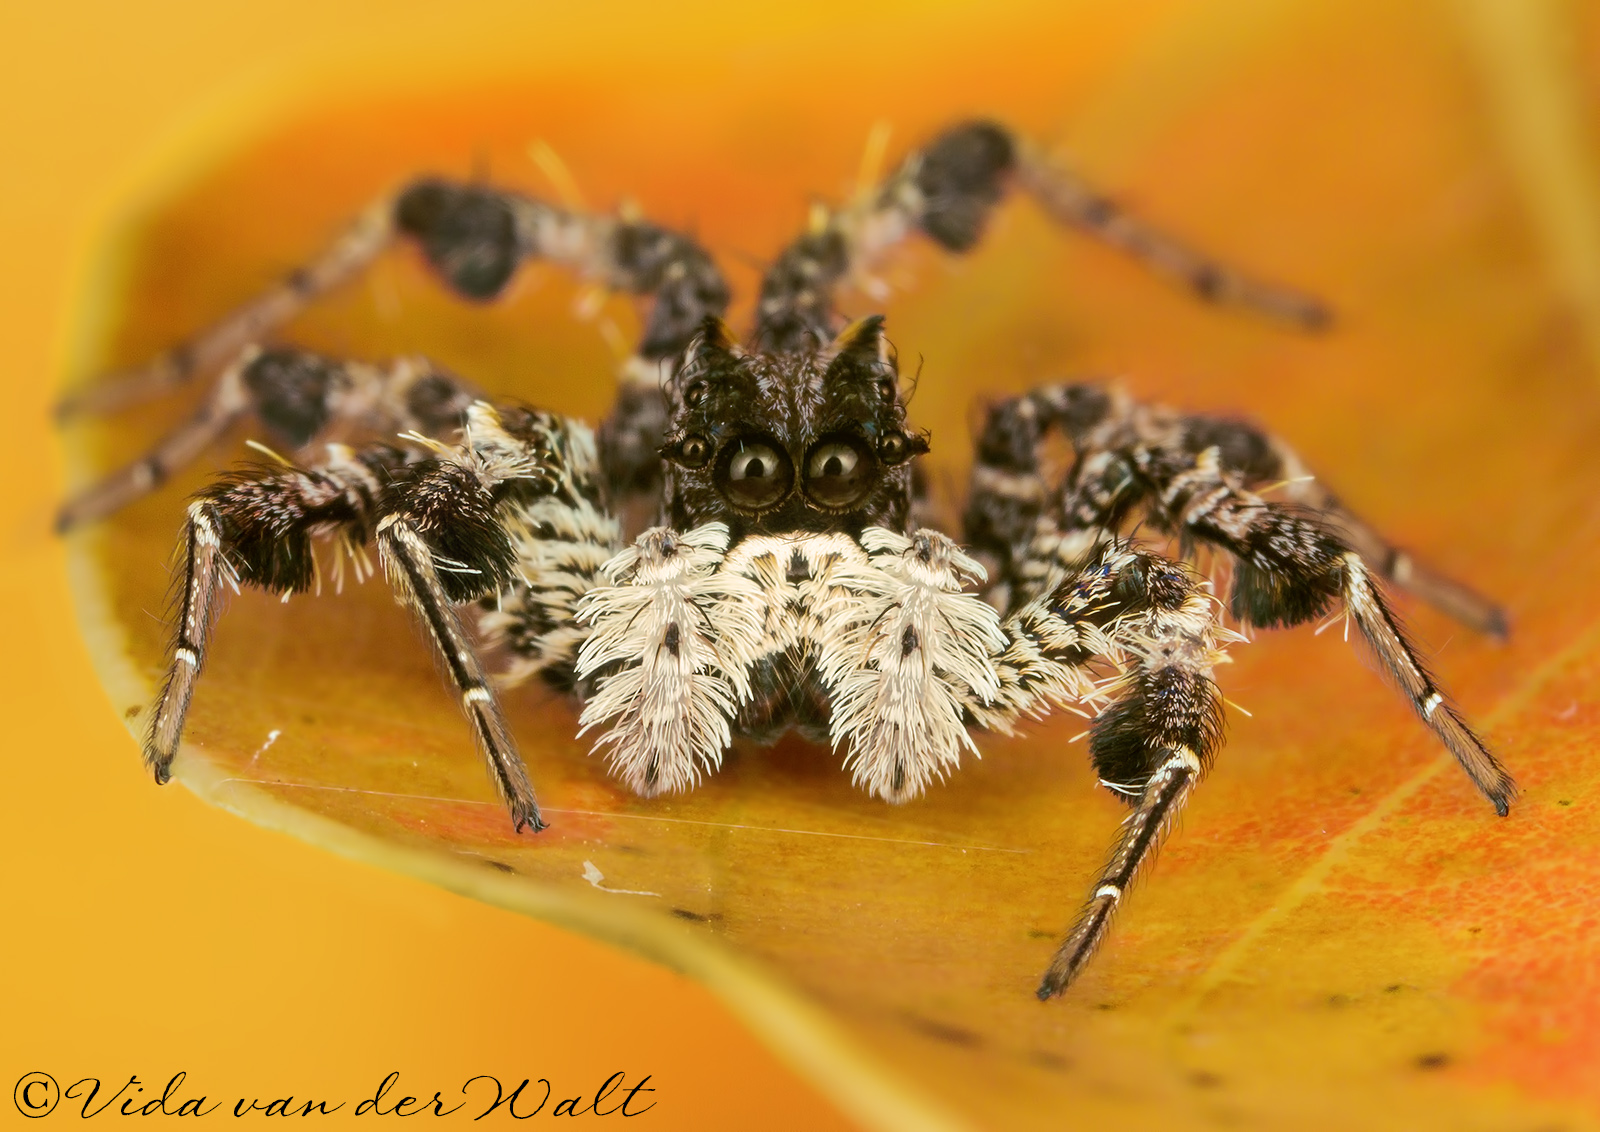 http://www.jumpingspiders.co.za/images/main/395.jpg